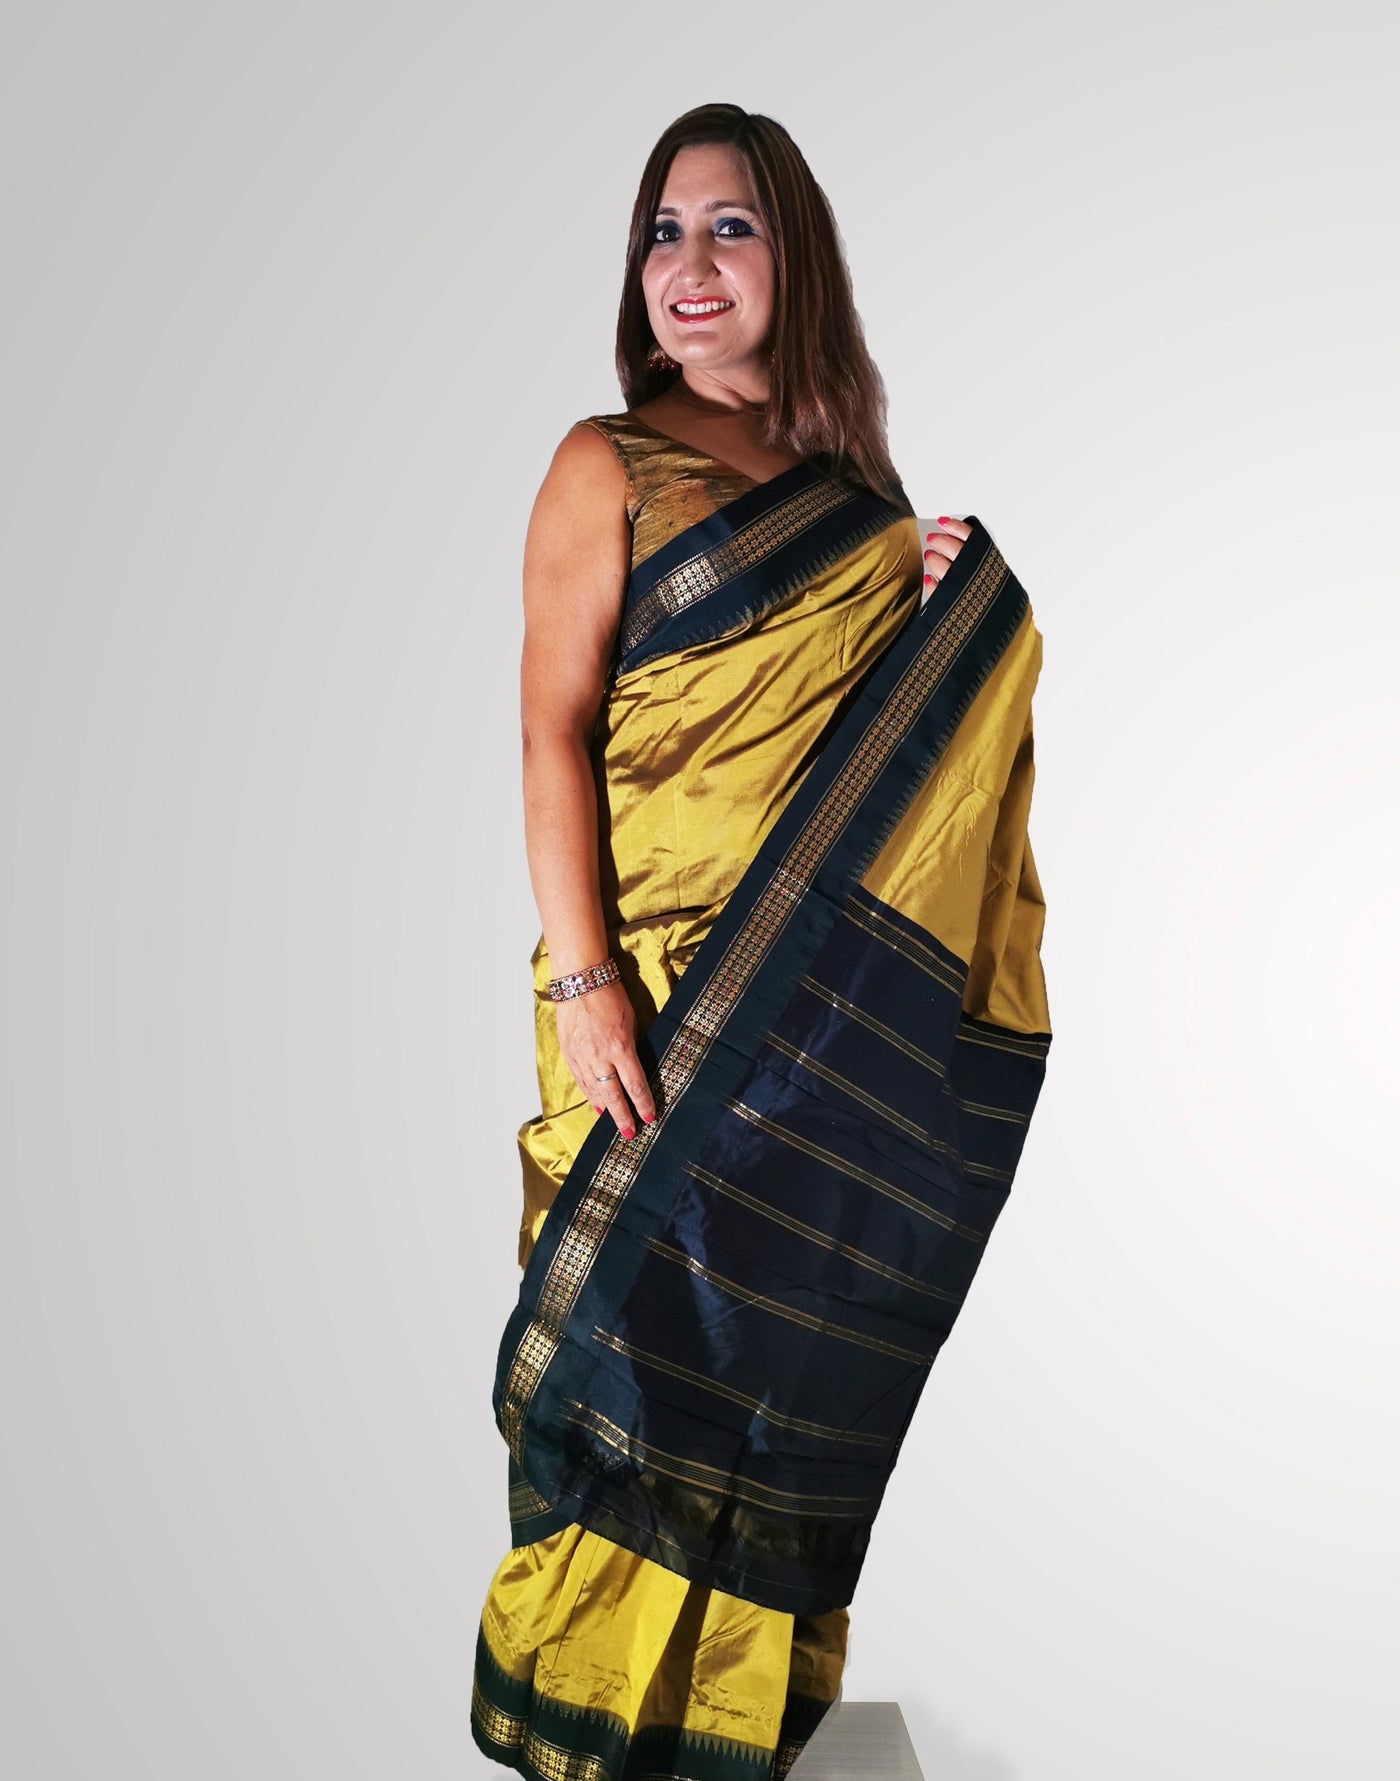 Saree in Glossy Yellow Pure Silk with Tample border - Indian Clothing in Denver, CO, Aurora, CO, Boulder, CO, Fort Collins, CO, Colorado Springs, CO, Parker, CO, Highlands Ranch, CO, Cherry Creek, CO, Centennial, CO, and Longmont, CO. Nationwide shipping USA - India Fashion X